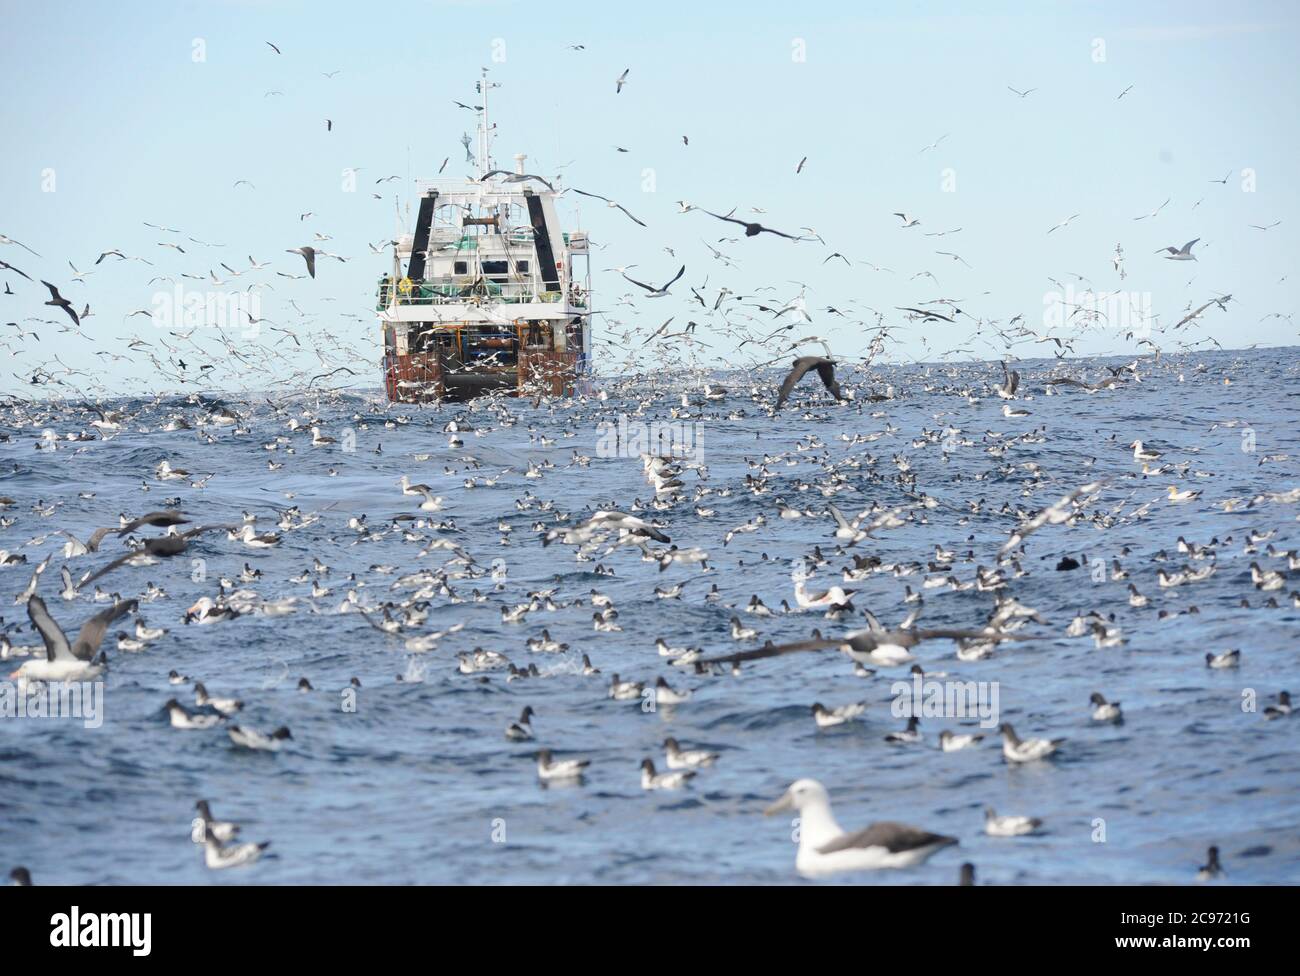 Trawler and huge flock of seabirds of the South African coast in the Atlantic Ocean. Many petrels, shearwaters and albatrosses flying around and swimming on the surface., South Africa Stock Photo